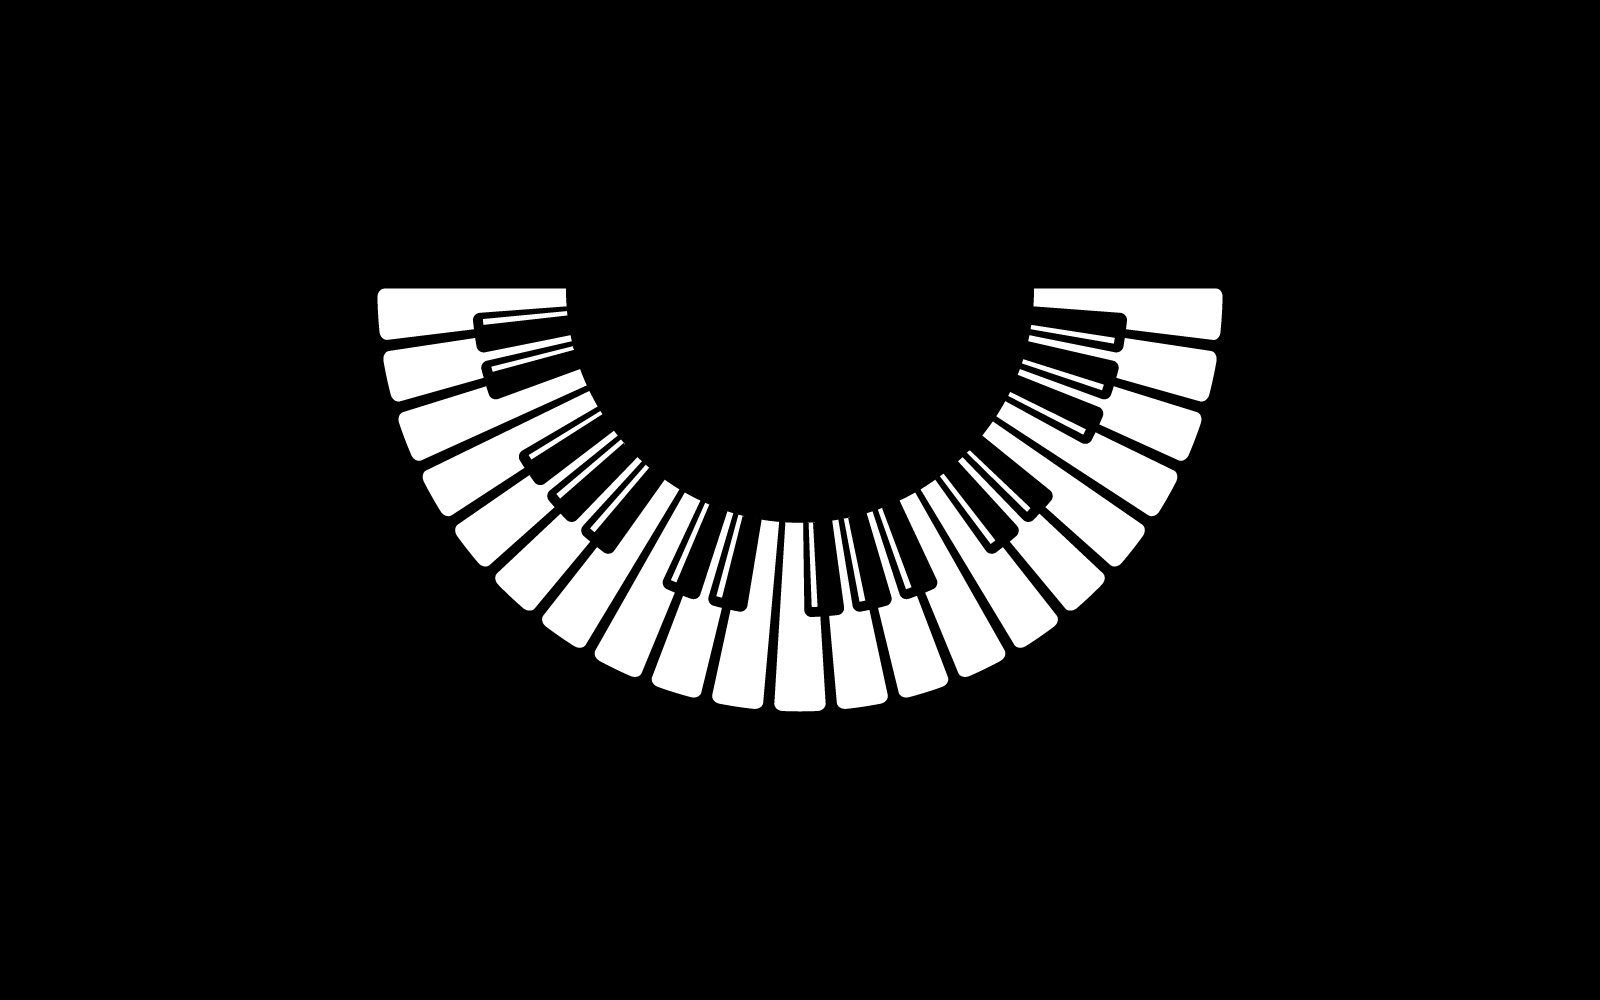 Piano on black background vector illustration flat design template